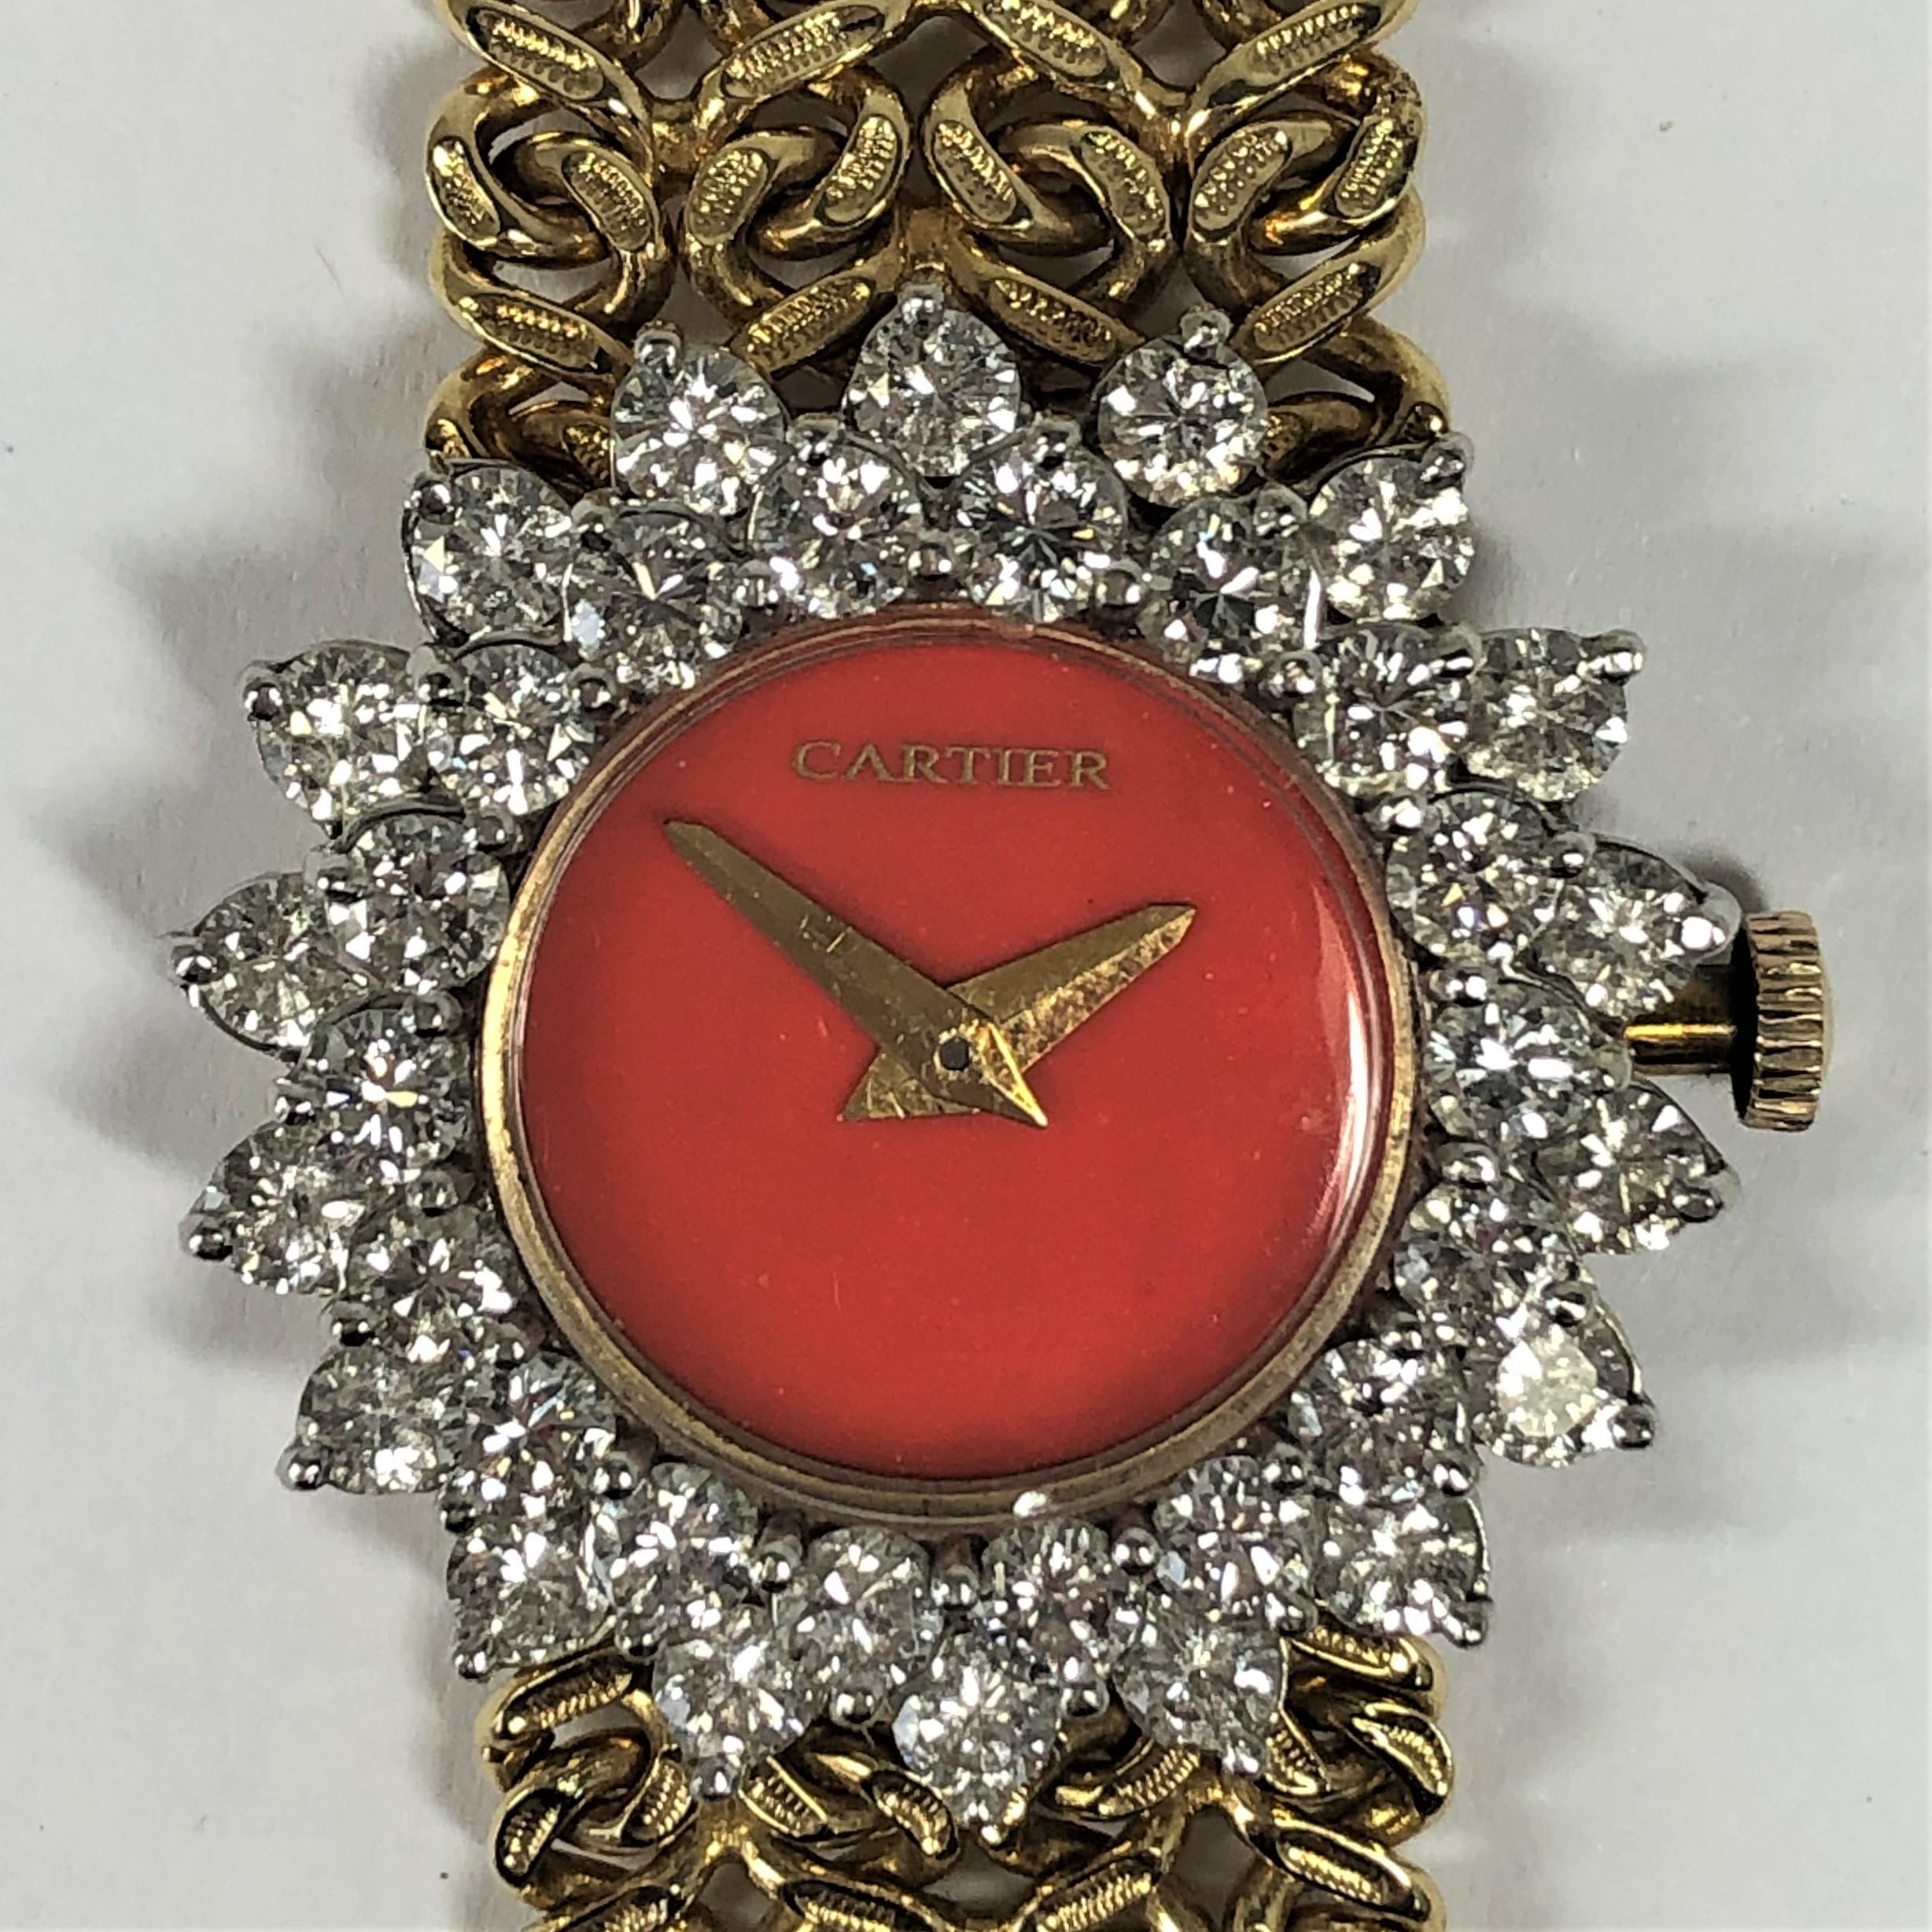 Manufactured for Cartier by Hammerman Brothers in the 1970s. This lovely 14K Yellow Gold
watch has a richly colored coral dial surrounded by two rows of round brilliant cut diamonds, weighing an approximate total of 3.5Ct of overall G/H Color and